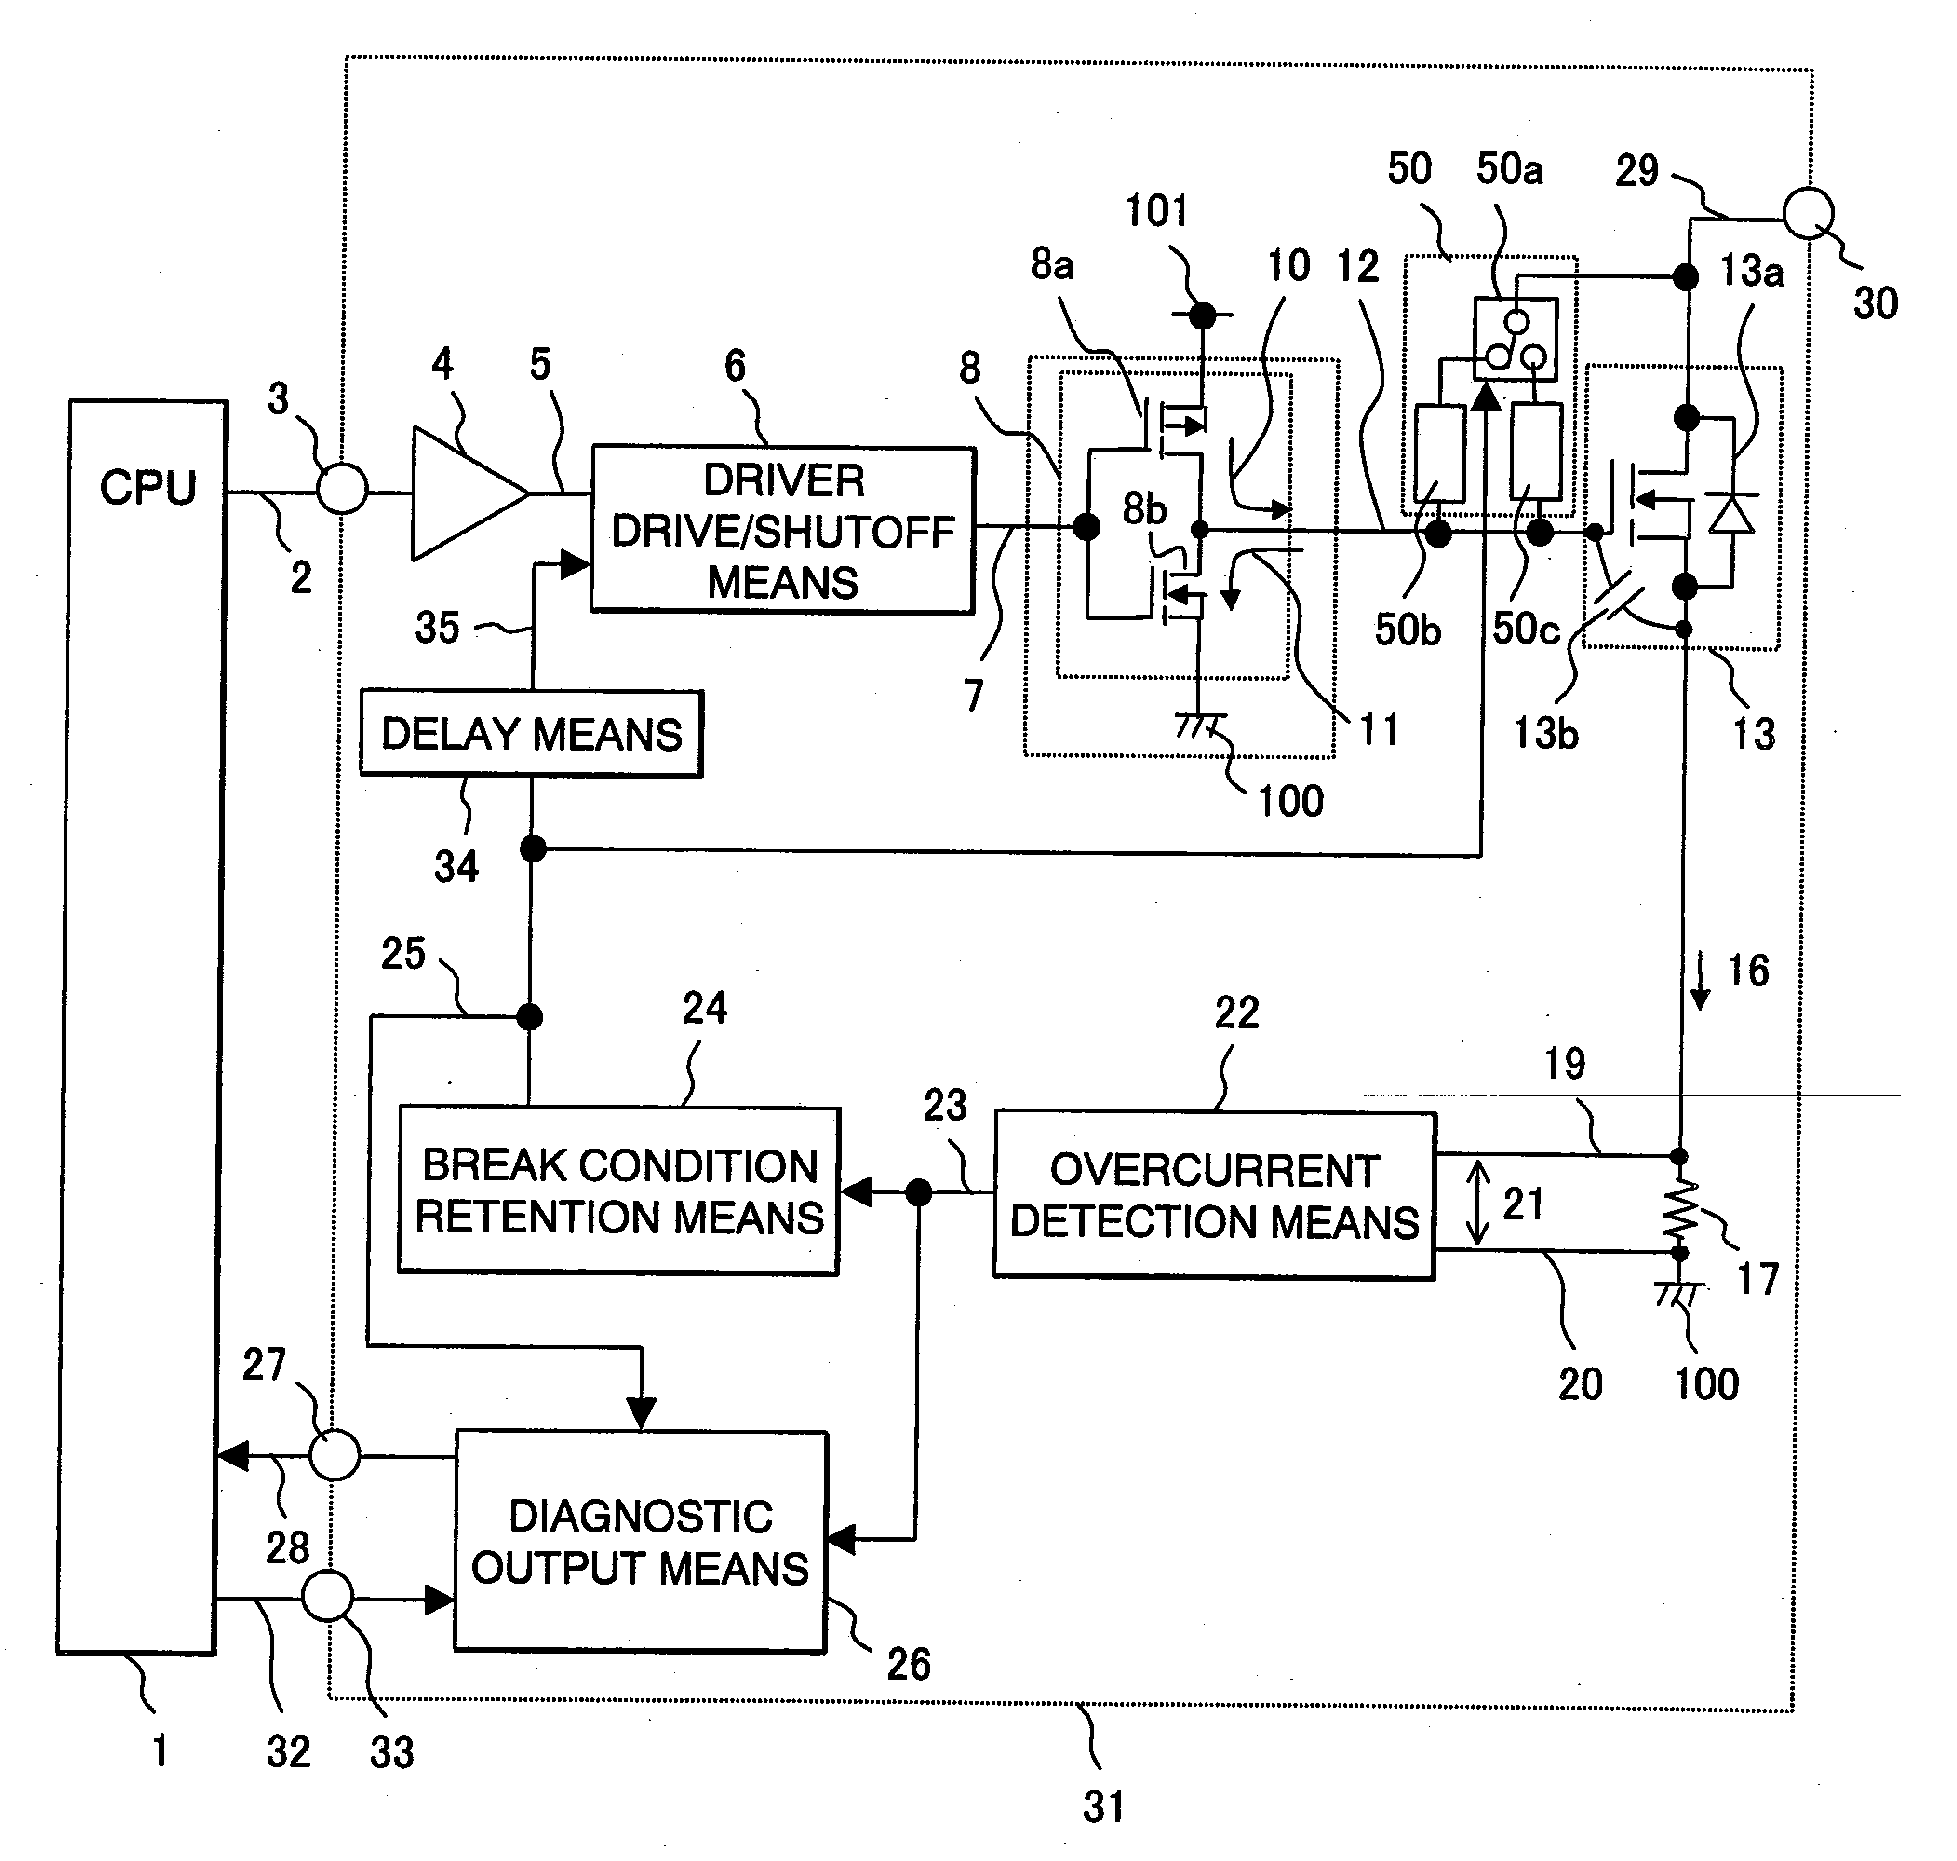 Load Driving and Diagnosis System and Control Method